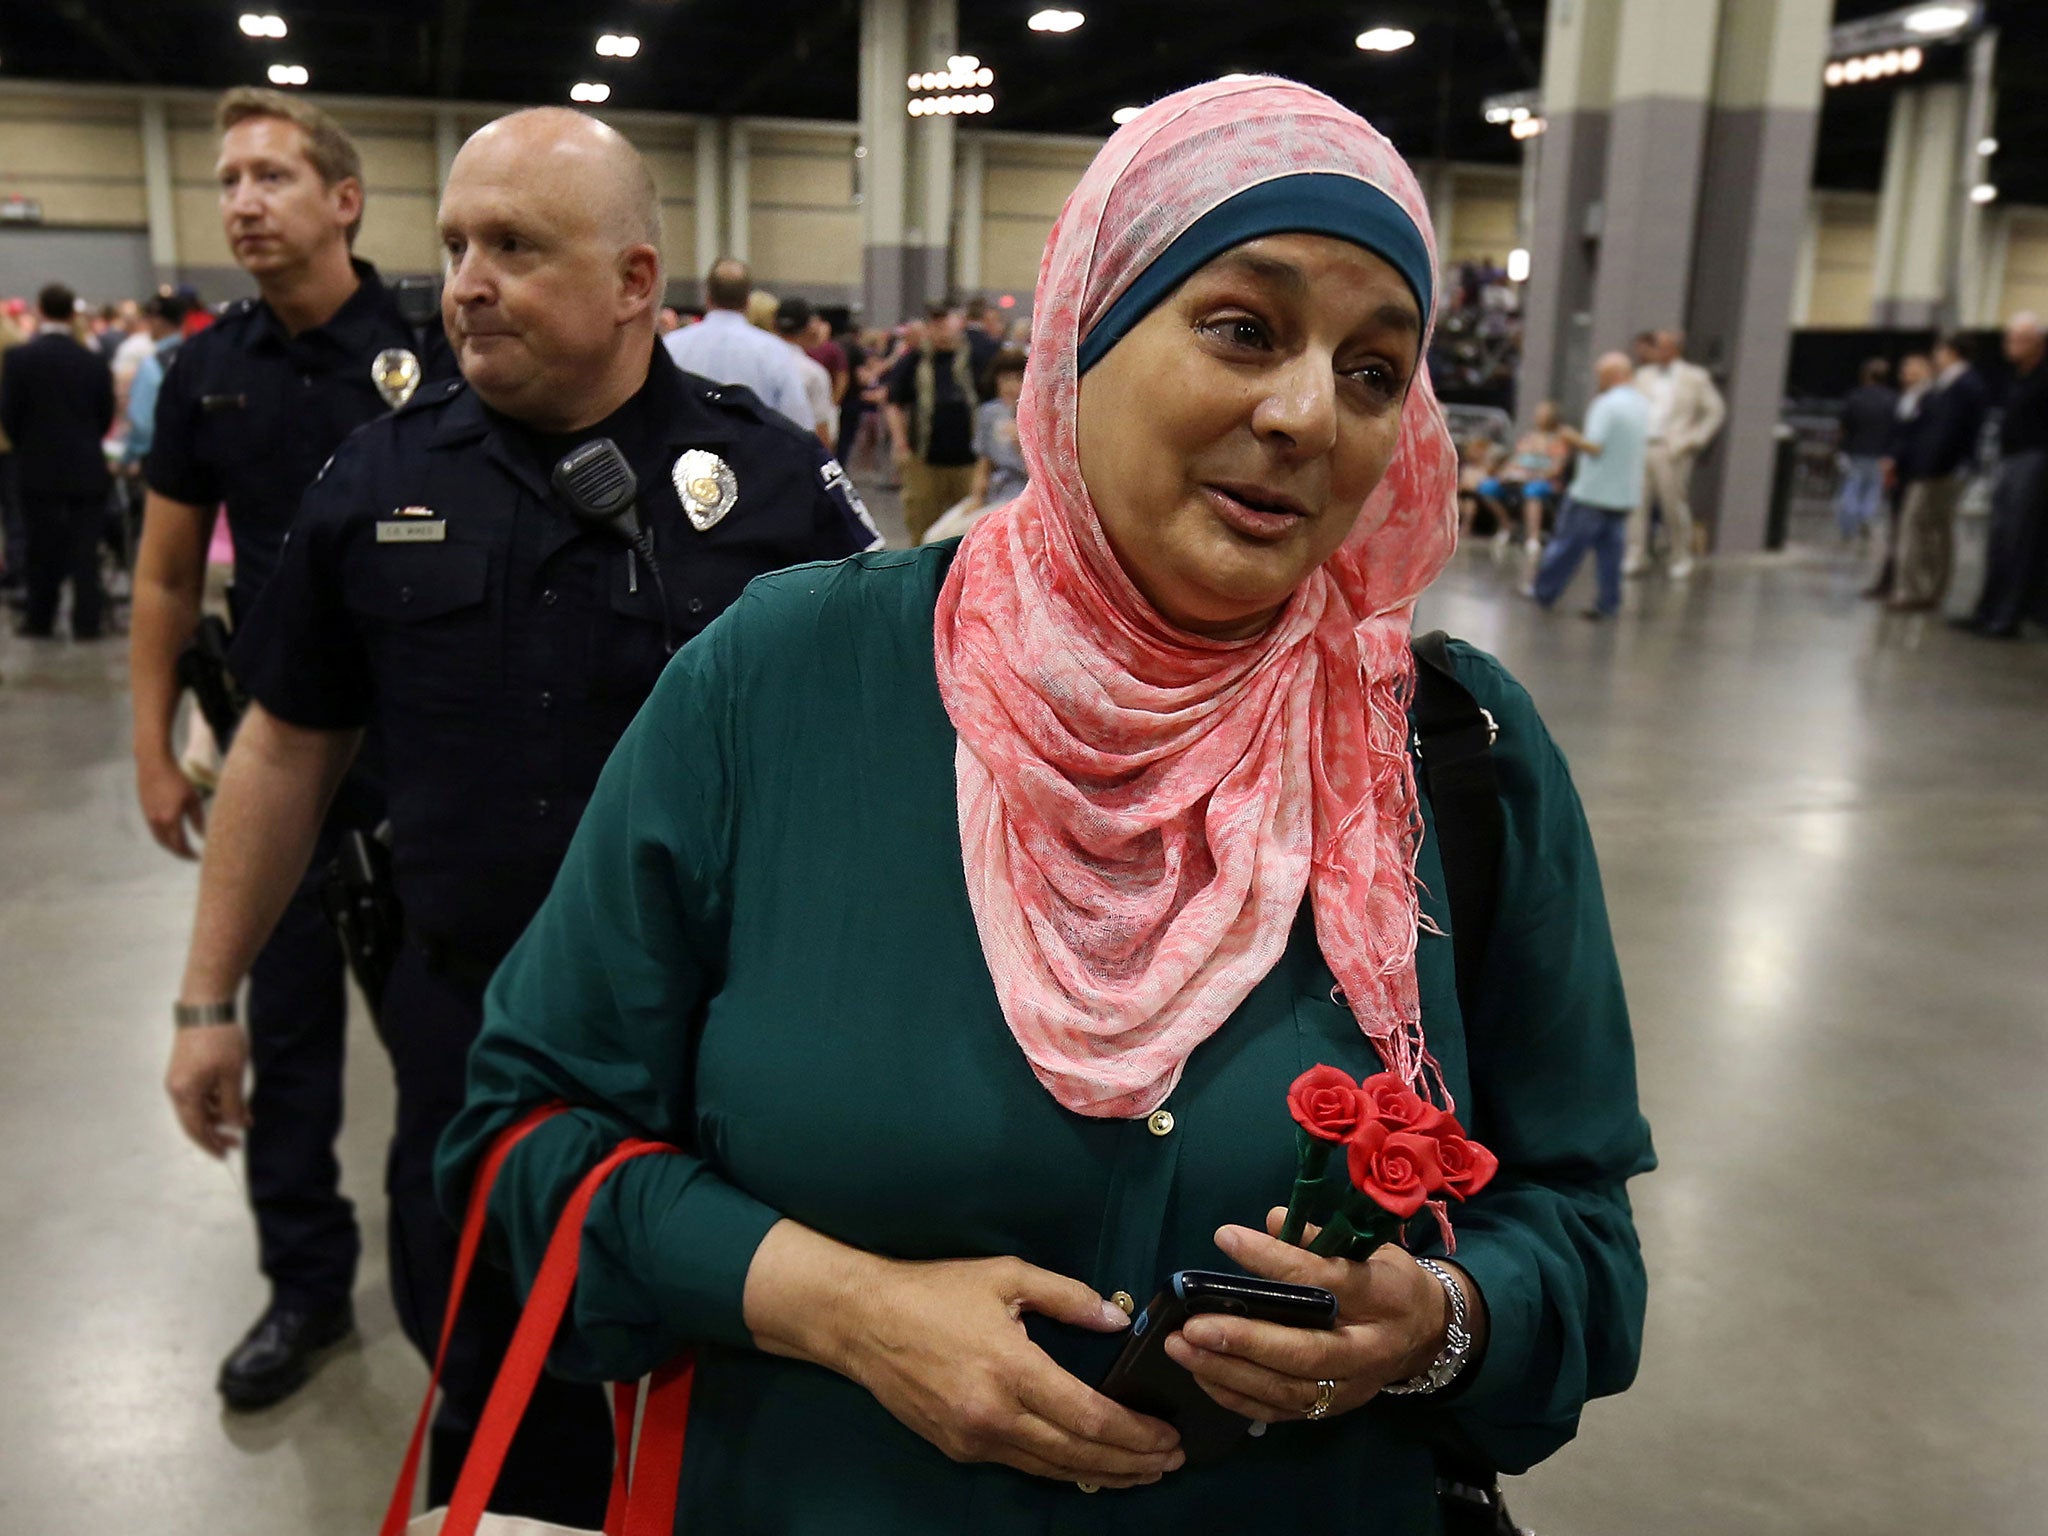 Police escort Rose Hamid out of Donald Trump's campaign rally in Charlotte, North Carolina, on 18 August 2016